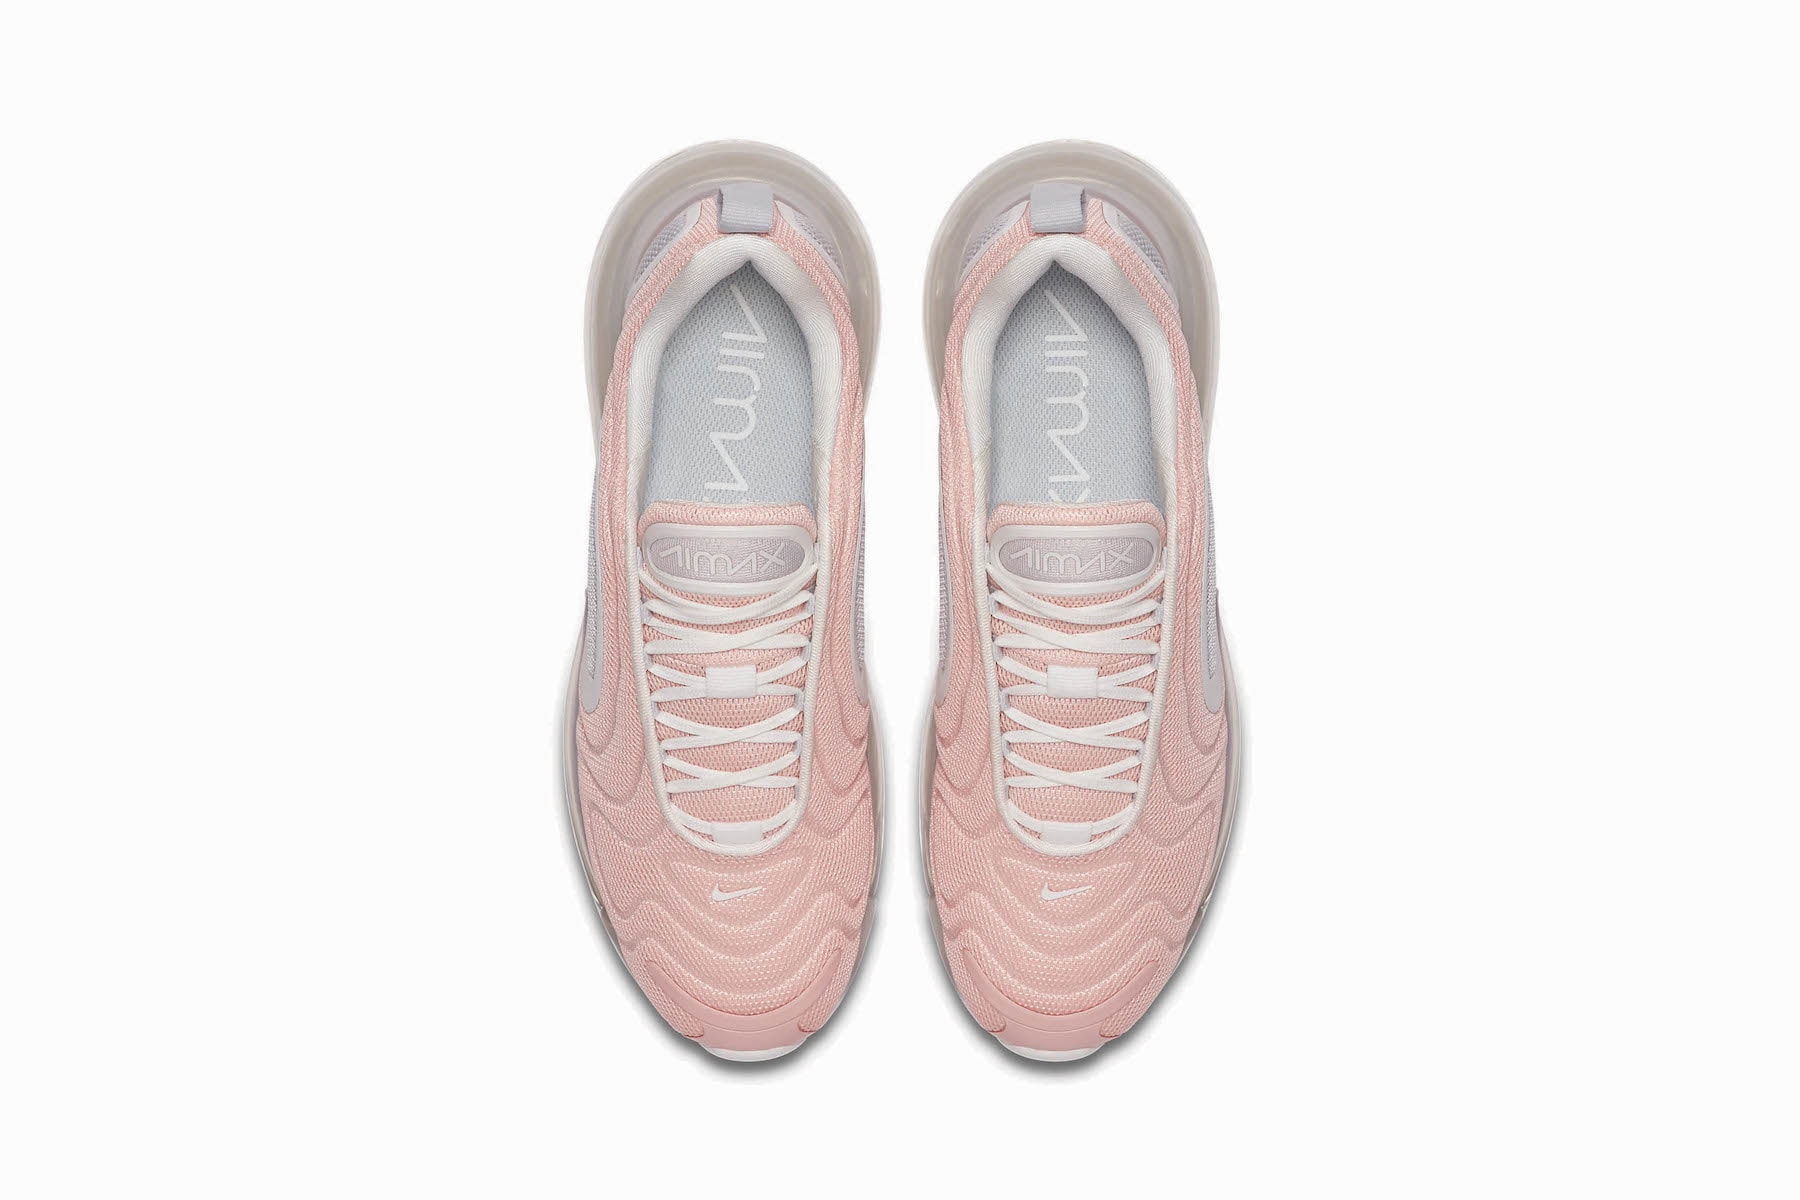 Nike Air Max 720 "Bleached Coral" Pastel Pink Sneaker Trainer Shoe Summer Footwear Release Chunky Platform Futuristic